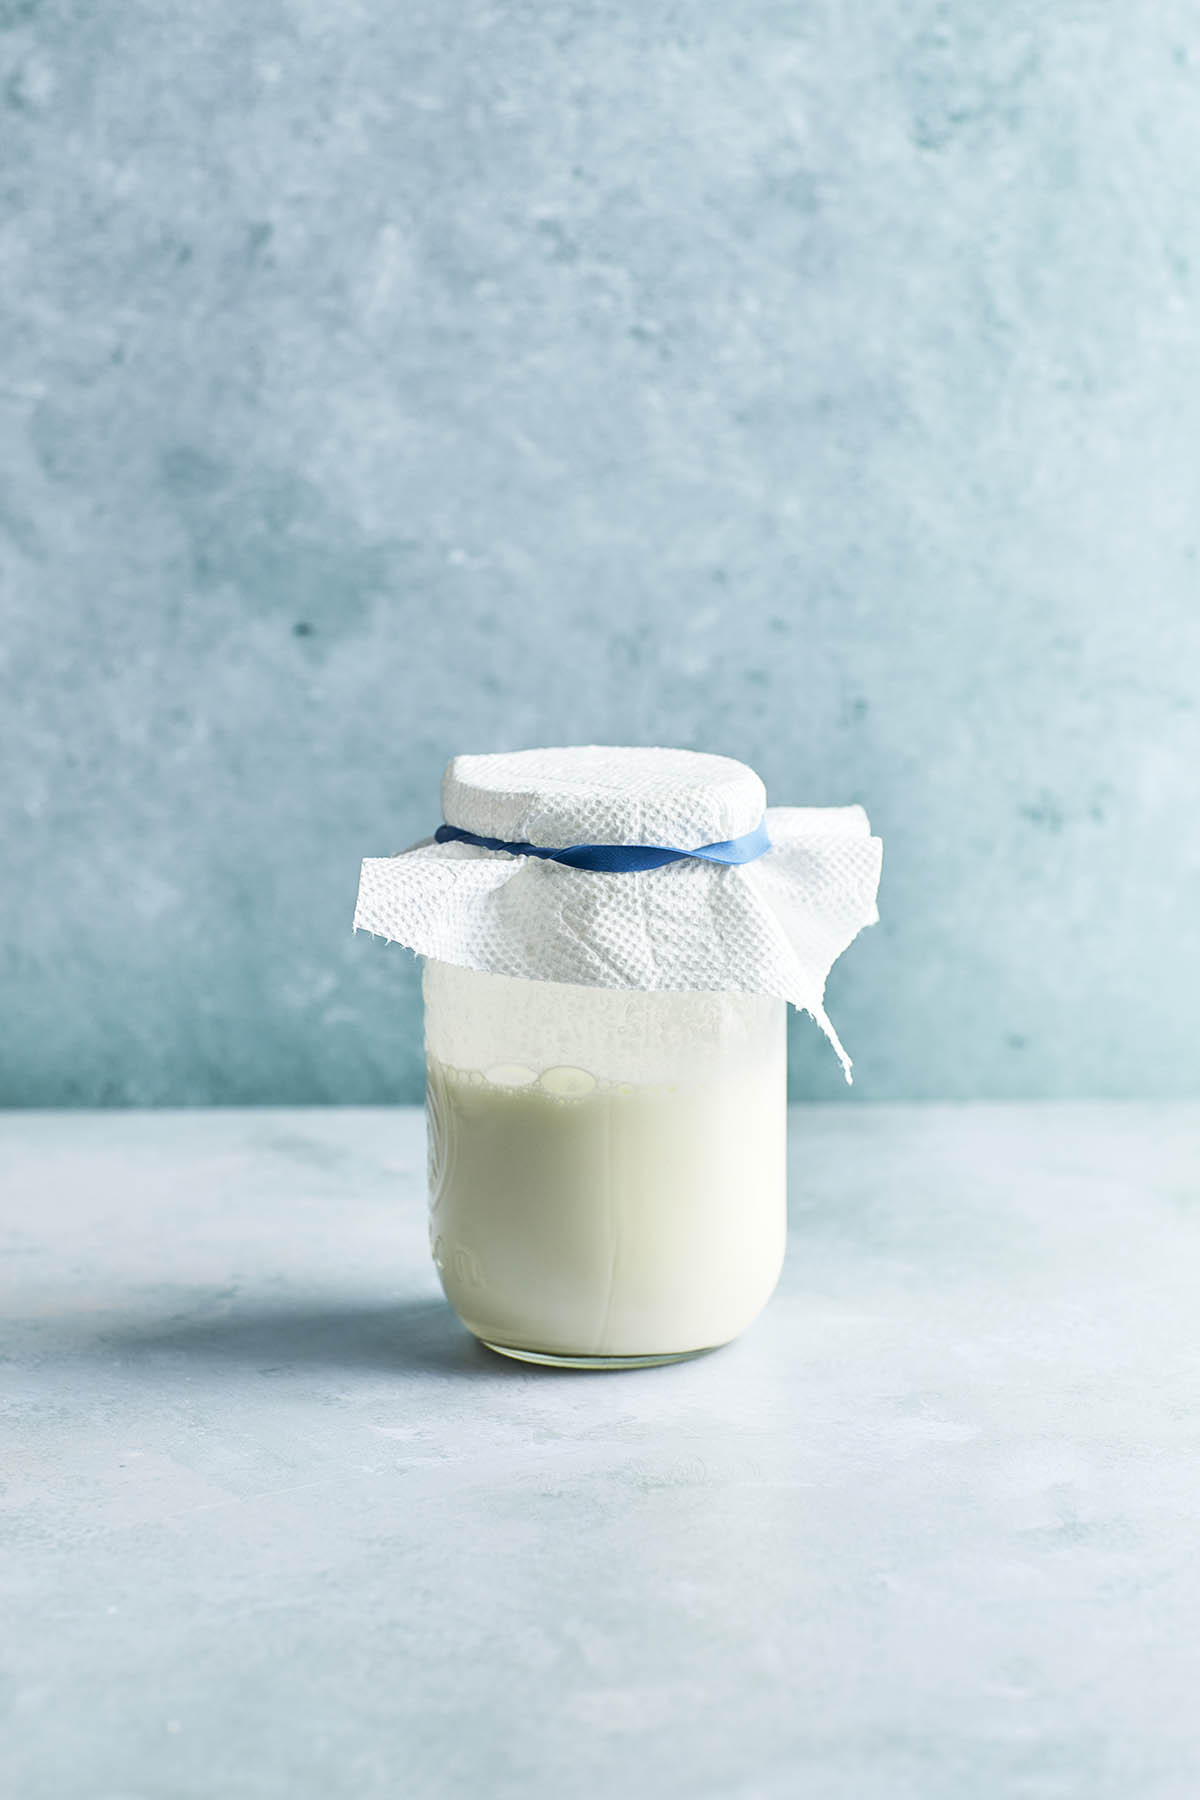 A jar of whipping cream and butter milk shaken together with a paper towel on top secured with a blue rubber band.